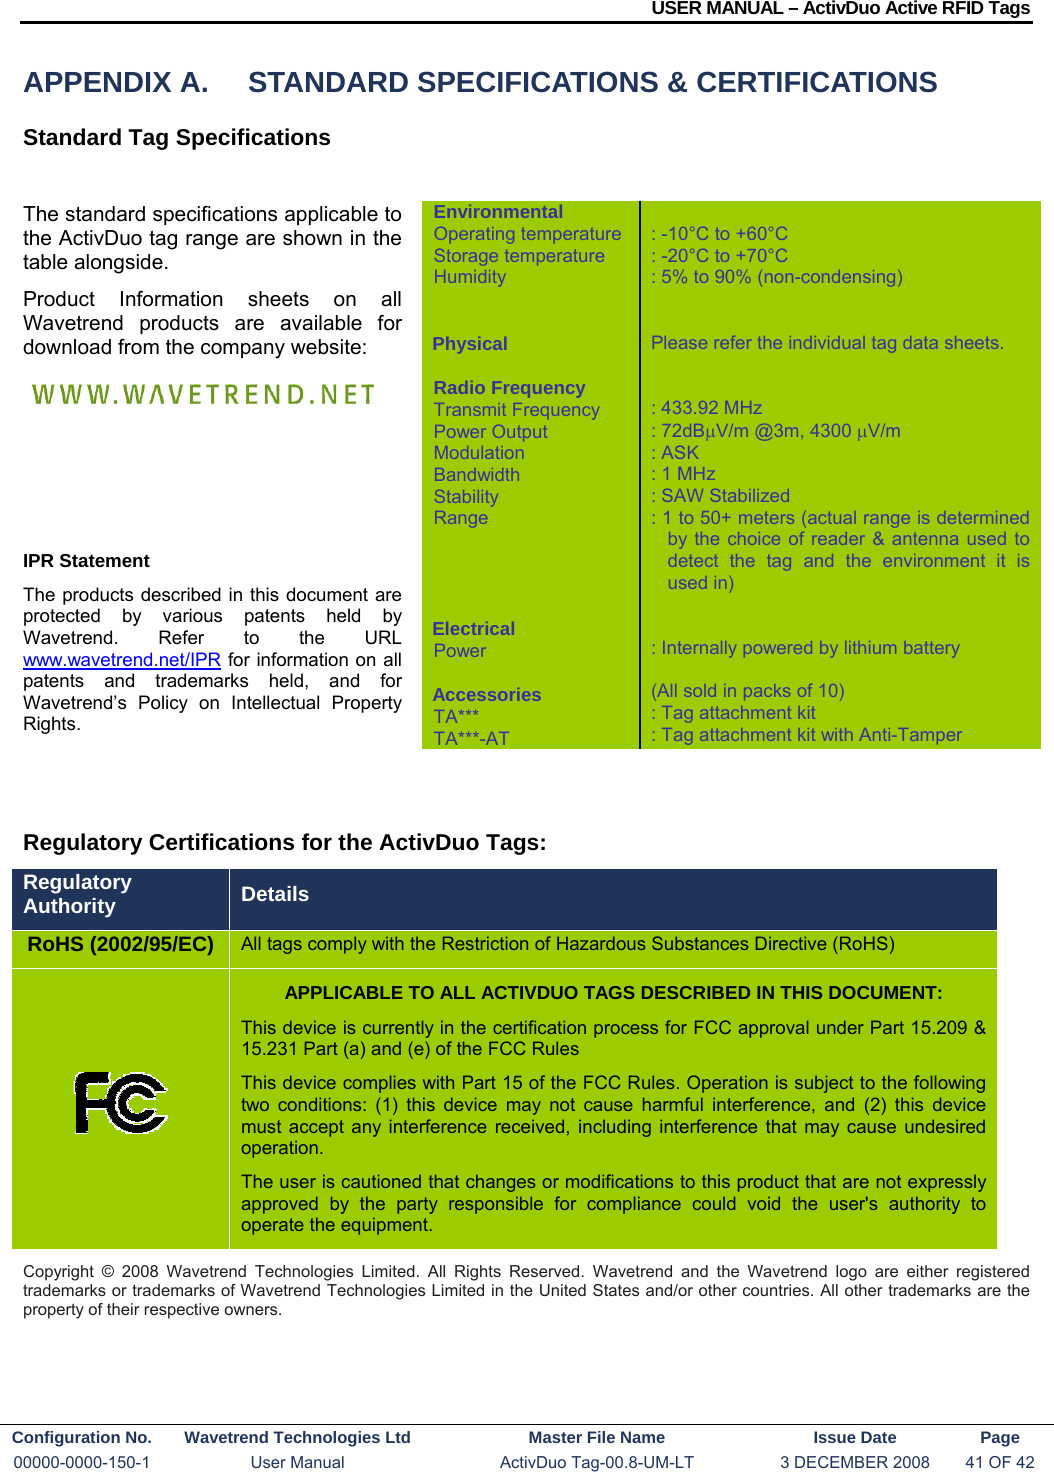 USER MANUAL – ActivDuo Active RFID Tags Configuration No.  Wavetrend Technologies Ltd  Master File Name   Issue Date  Page 00000-0000-150-1  User Manual  ActivDuo Tag-00.8-UM-LT  3 DECEMBER 2008  41 OF 42  APPENDIX A.  STANDARD SPECIFICATIONS &amp; CERTIFICATIONS Standard Tag Specifications  The standard specifications applicable to the ActivDuo tag range are shown in the table alongside.  Product Information sheets on all Wavetrend products are available for download from the company website:      IPR Statement The products described in this document are protected by various patents held by Wavetrend. Refer to the URL www.wavetrend.net/IPR for information on all patents and trademarks held, and for Wavetrend’s Policy on Intellectual Property Rights.     Regulatory Certifications for the ActivDuo Tags: Regulatory Authority  Details RoHS (2002/95/EC)  All tags comply with the Restriction of Hazardous Substances Directive (RoHS)  APPLICABLE TO ALL ACTIVDUO TAGS DESCRIBED IN THIS DOCUMENT: This device is currently in the certification process for FCC approval under Part 15.209 &amp; 15.231 Part (a) and (e) of the FCC Rules This device complies with Part 15 of the FCC Rules. Operation is subject to the following two conditions: (1) this device may not cause harmful interference, and (2) this device must accept any interference received, including interference that may cause undesired operation.  The user is cautioned that changes or modifications to this product that are not expressly approved by the party responsible for compliance could void the user&apos;s authority to operate the equipment. Copyright © 2008 Wavetrend Technologies Limited. All Rights Reserved. Wavetrend and the Wavetrend logo are either registered trademarks or trademarks of Wavetrend Technologies Limited in the United States and/or other countries. All other trademarks are the property of their respective owners. Environmental Operating temperature Storage temperature Humidity   Physical  Radio Frequency Transmit Frequency Power Output Modulation Bandwidth Stability Range     Electrical Power  Accessories TA*** TA***-AT  : -10°C to +60°C : -20°C to +70°C : 5% to 90% (non-condensing)   Please refer the individual tag data sheets.   : 433.92 MHz : 72dBμV/m @3m, 4300 μV/m : ASK : 1 MHz : SAW Stabilized : 1 to 50+ meters (actual range is determined by the choice of reader &amp; antenna used to detect the tag and the environment it is used in)   : Internally powered by lithium battery  (All sold in packs of 10) : Tag attachment kit : Tag attachment kit with Anti-Tamper 